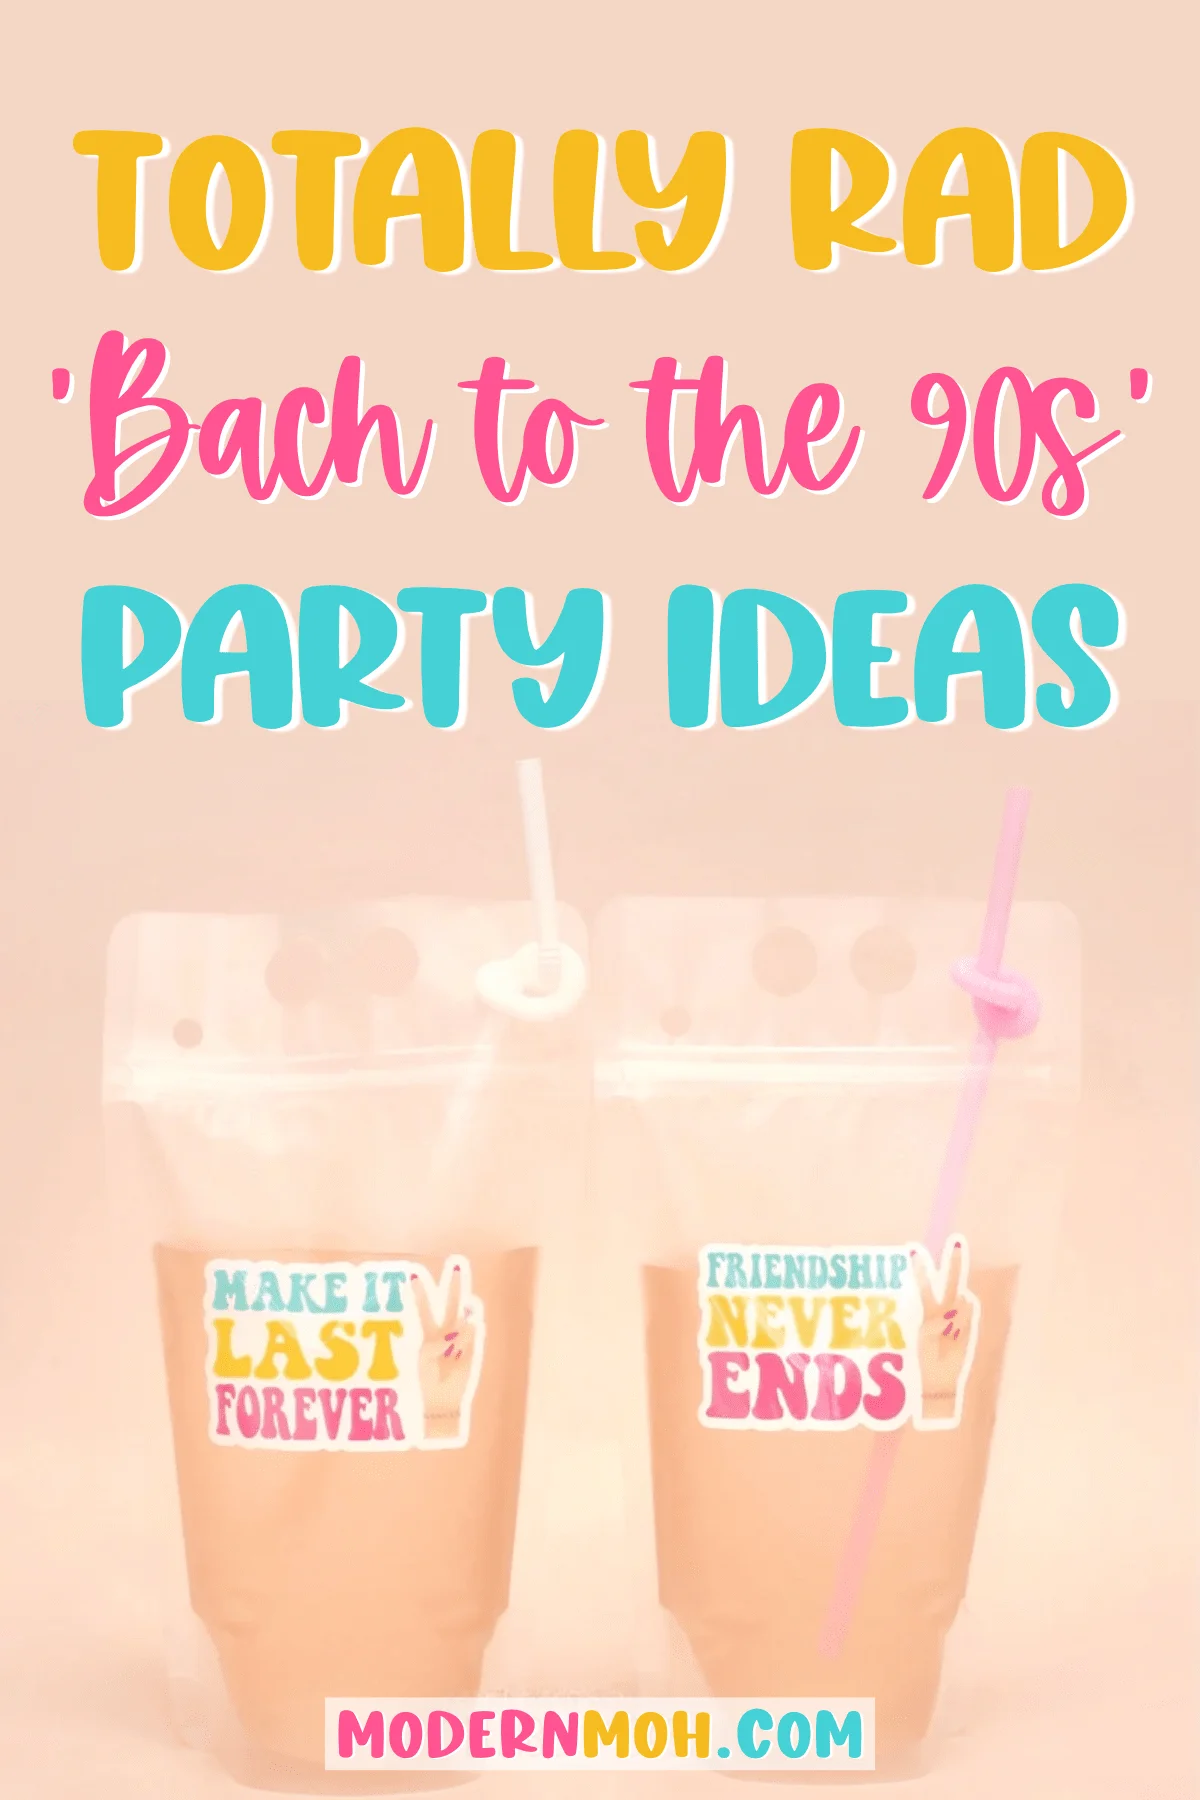 Get Ready for a Blast from the Past at Your 90s-Themed Party!